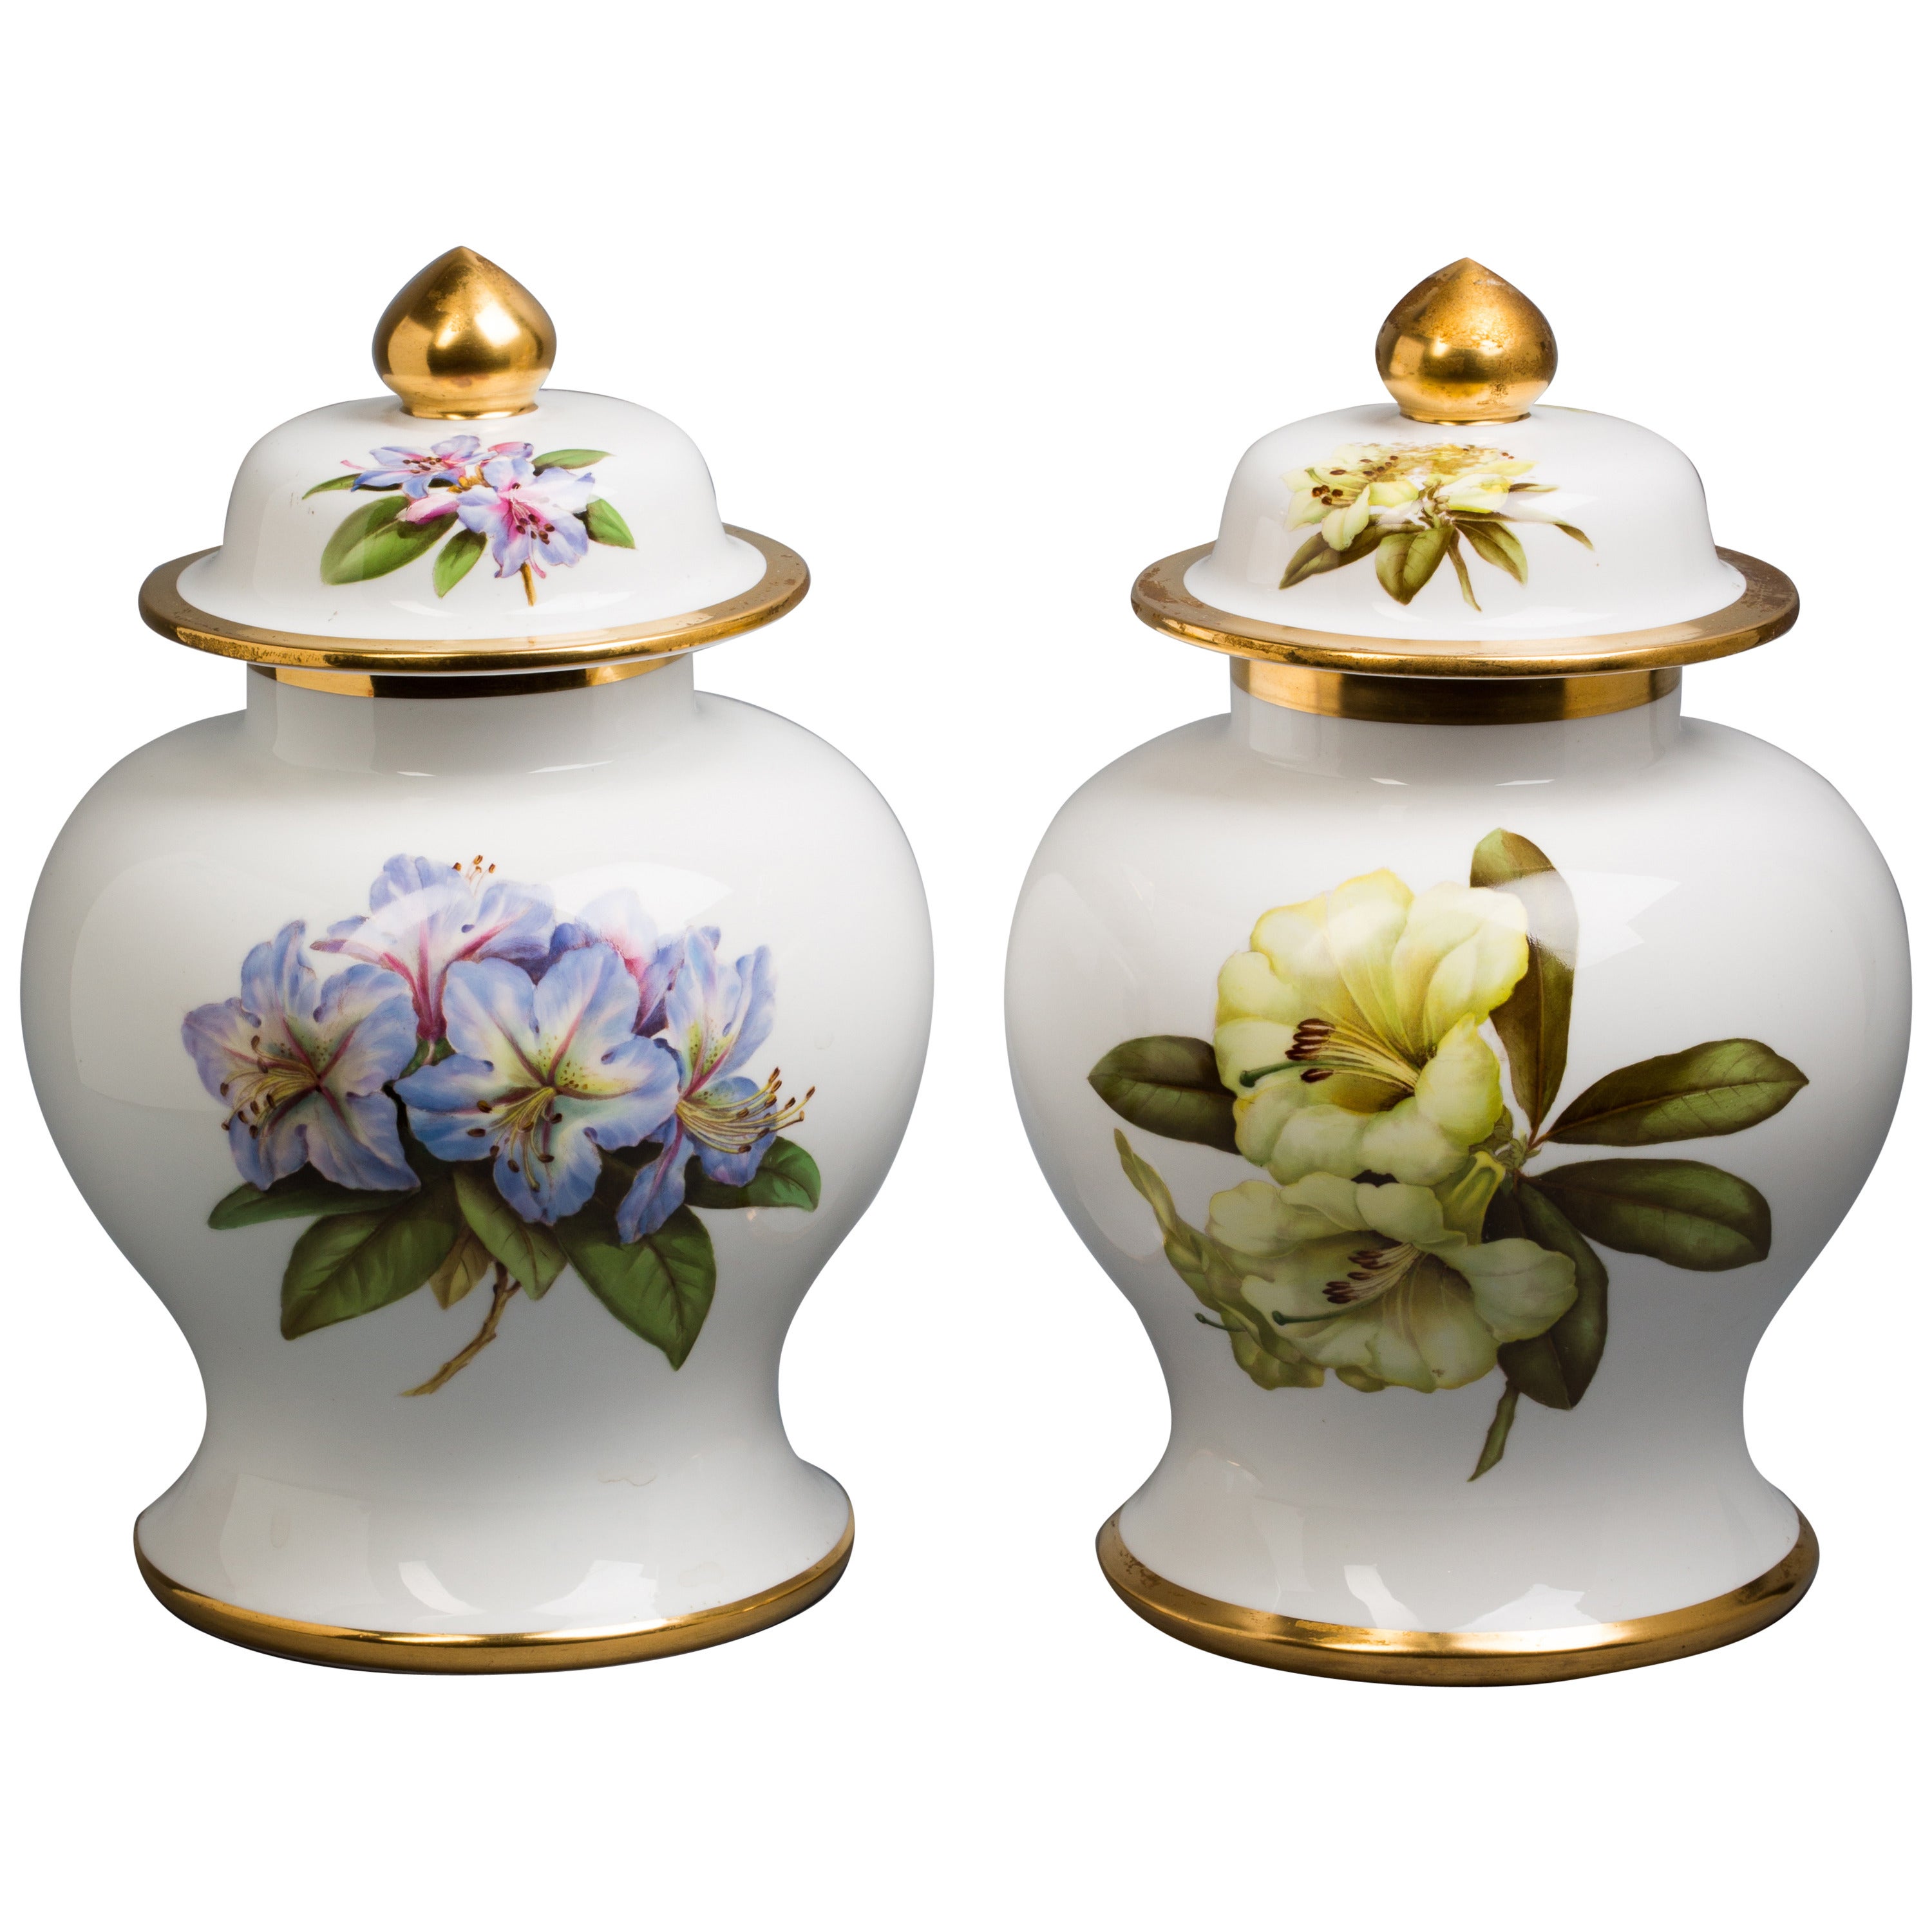 Pair of English Porcelain Covered Urns, Spode Copeland, circa 1950 For Sale